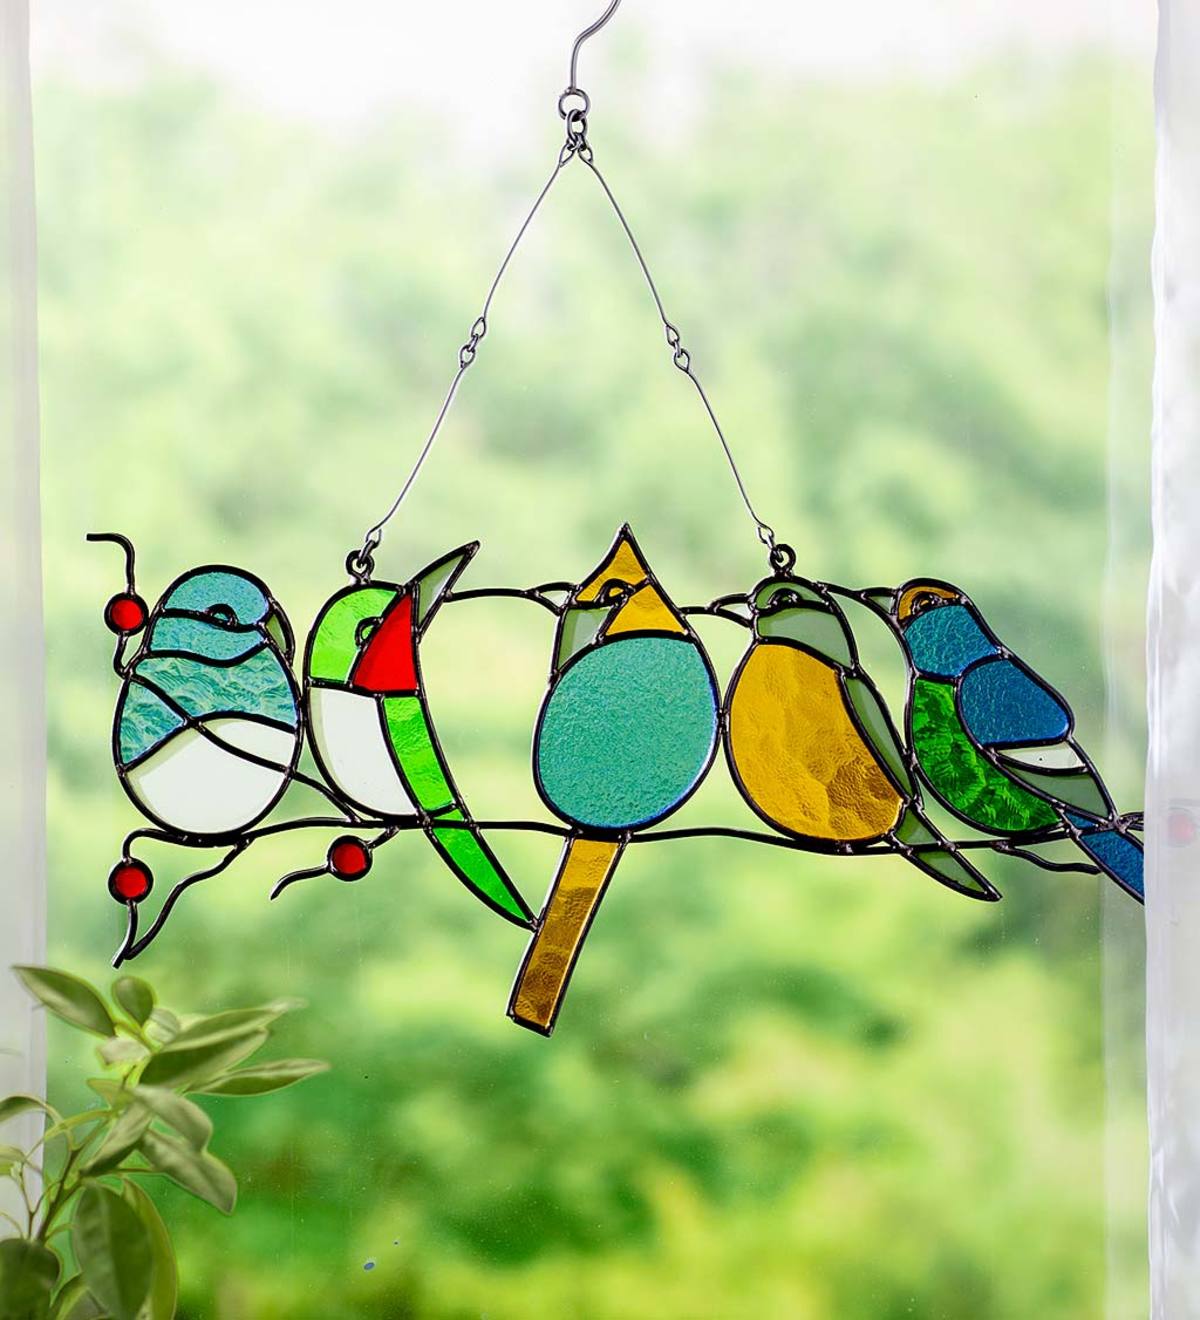 Details about   Stained Glass Window Hangings Stained Glass Bird Ornaments Window Suncatcher 